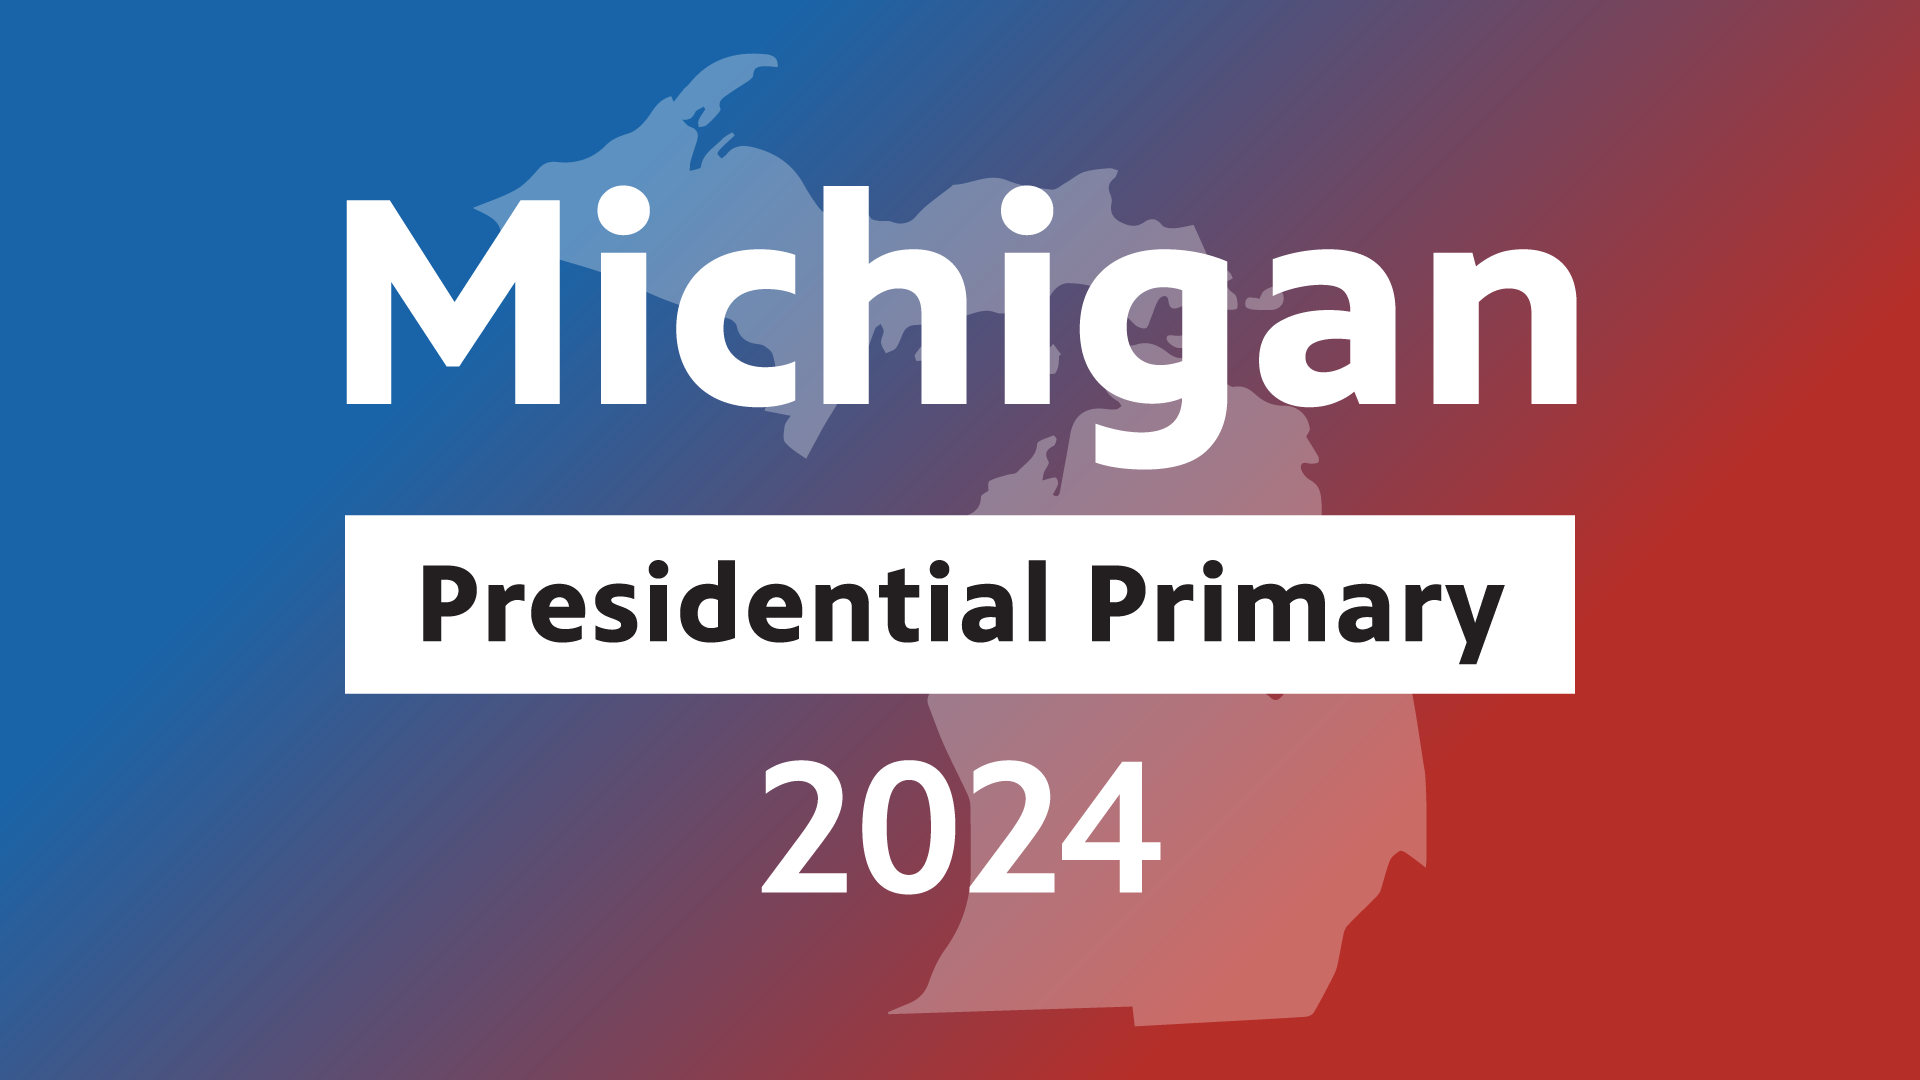 A graphic ouline of the state of michiagn with text "Michigan Presidential Primary 2024" over it